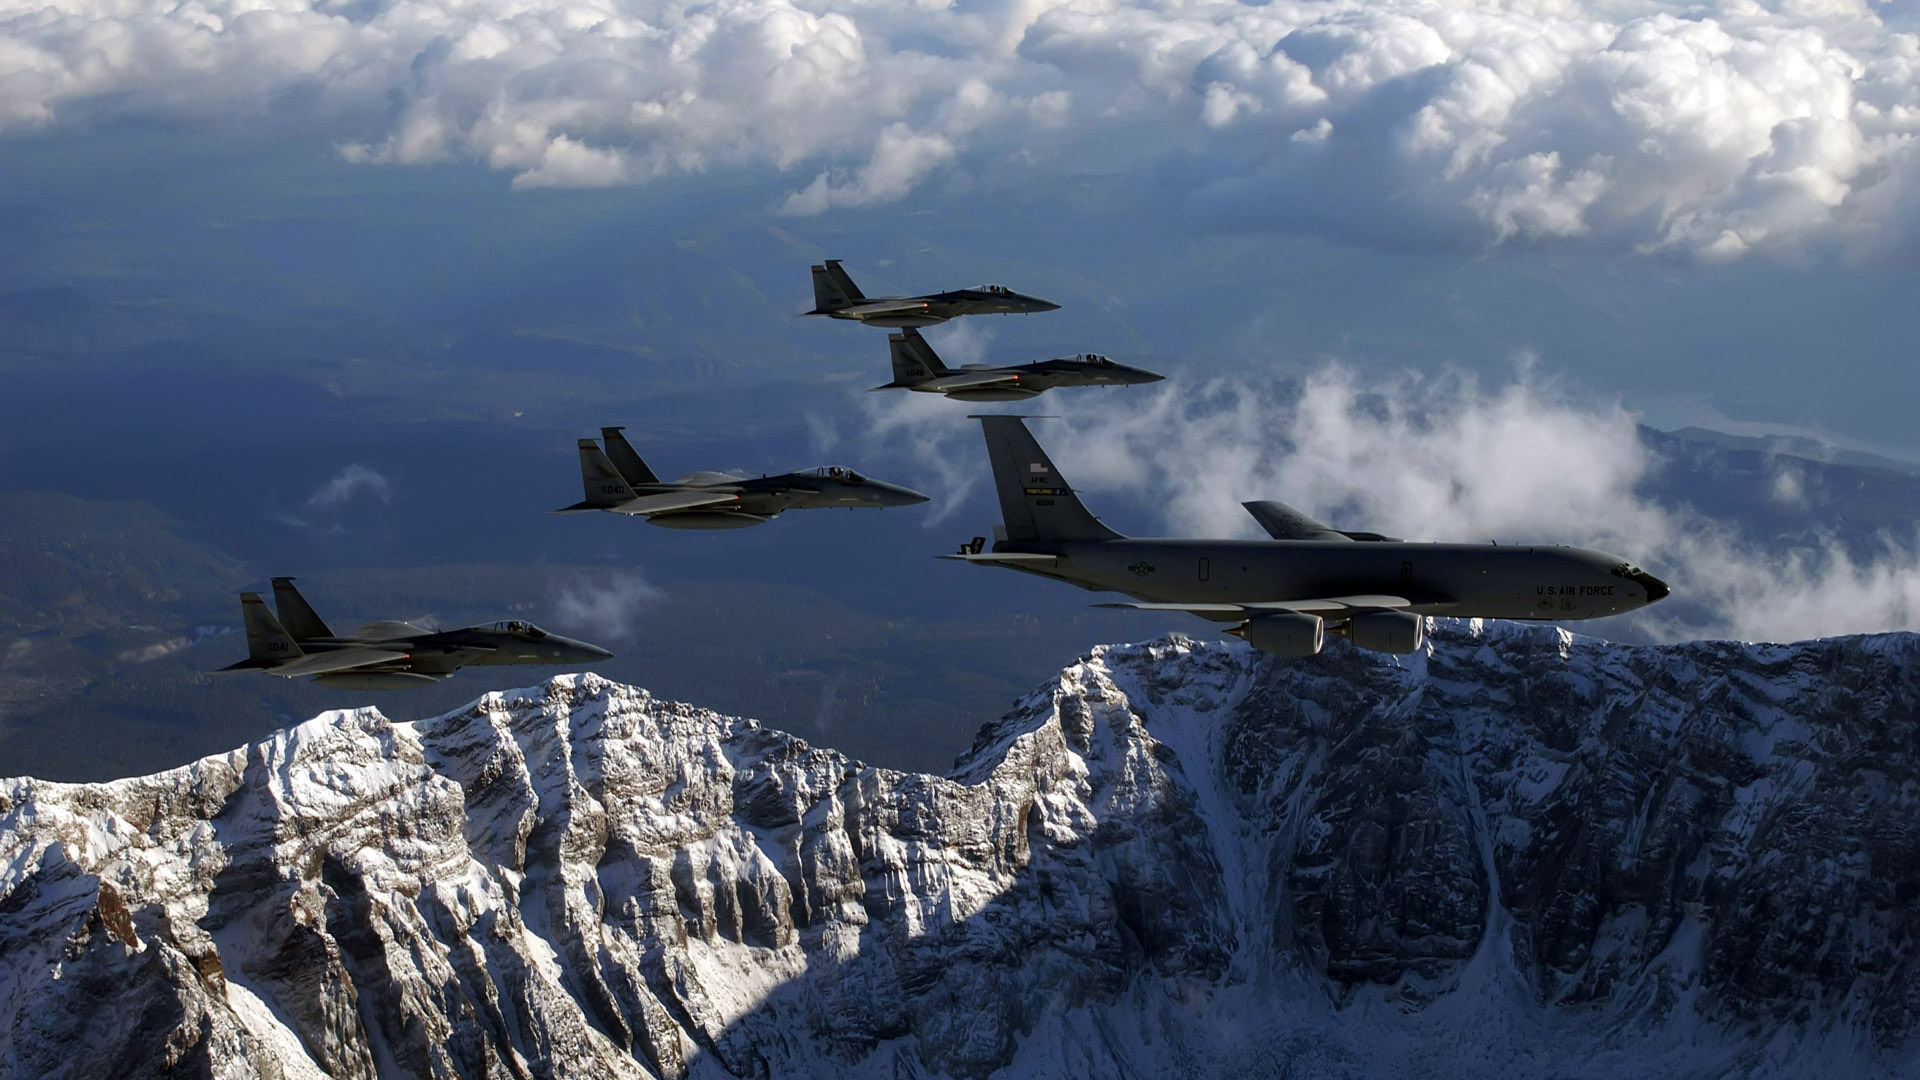 And Us Air Force HD Wallpaper Image For Your